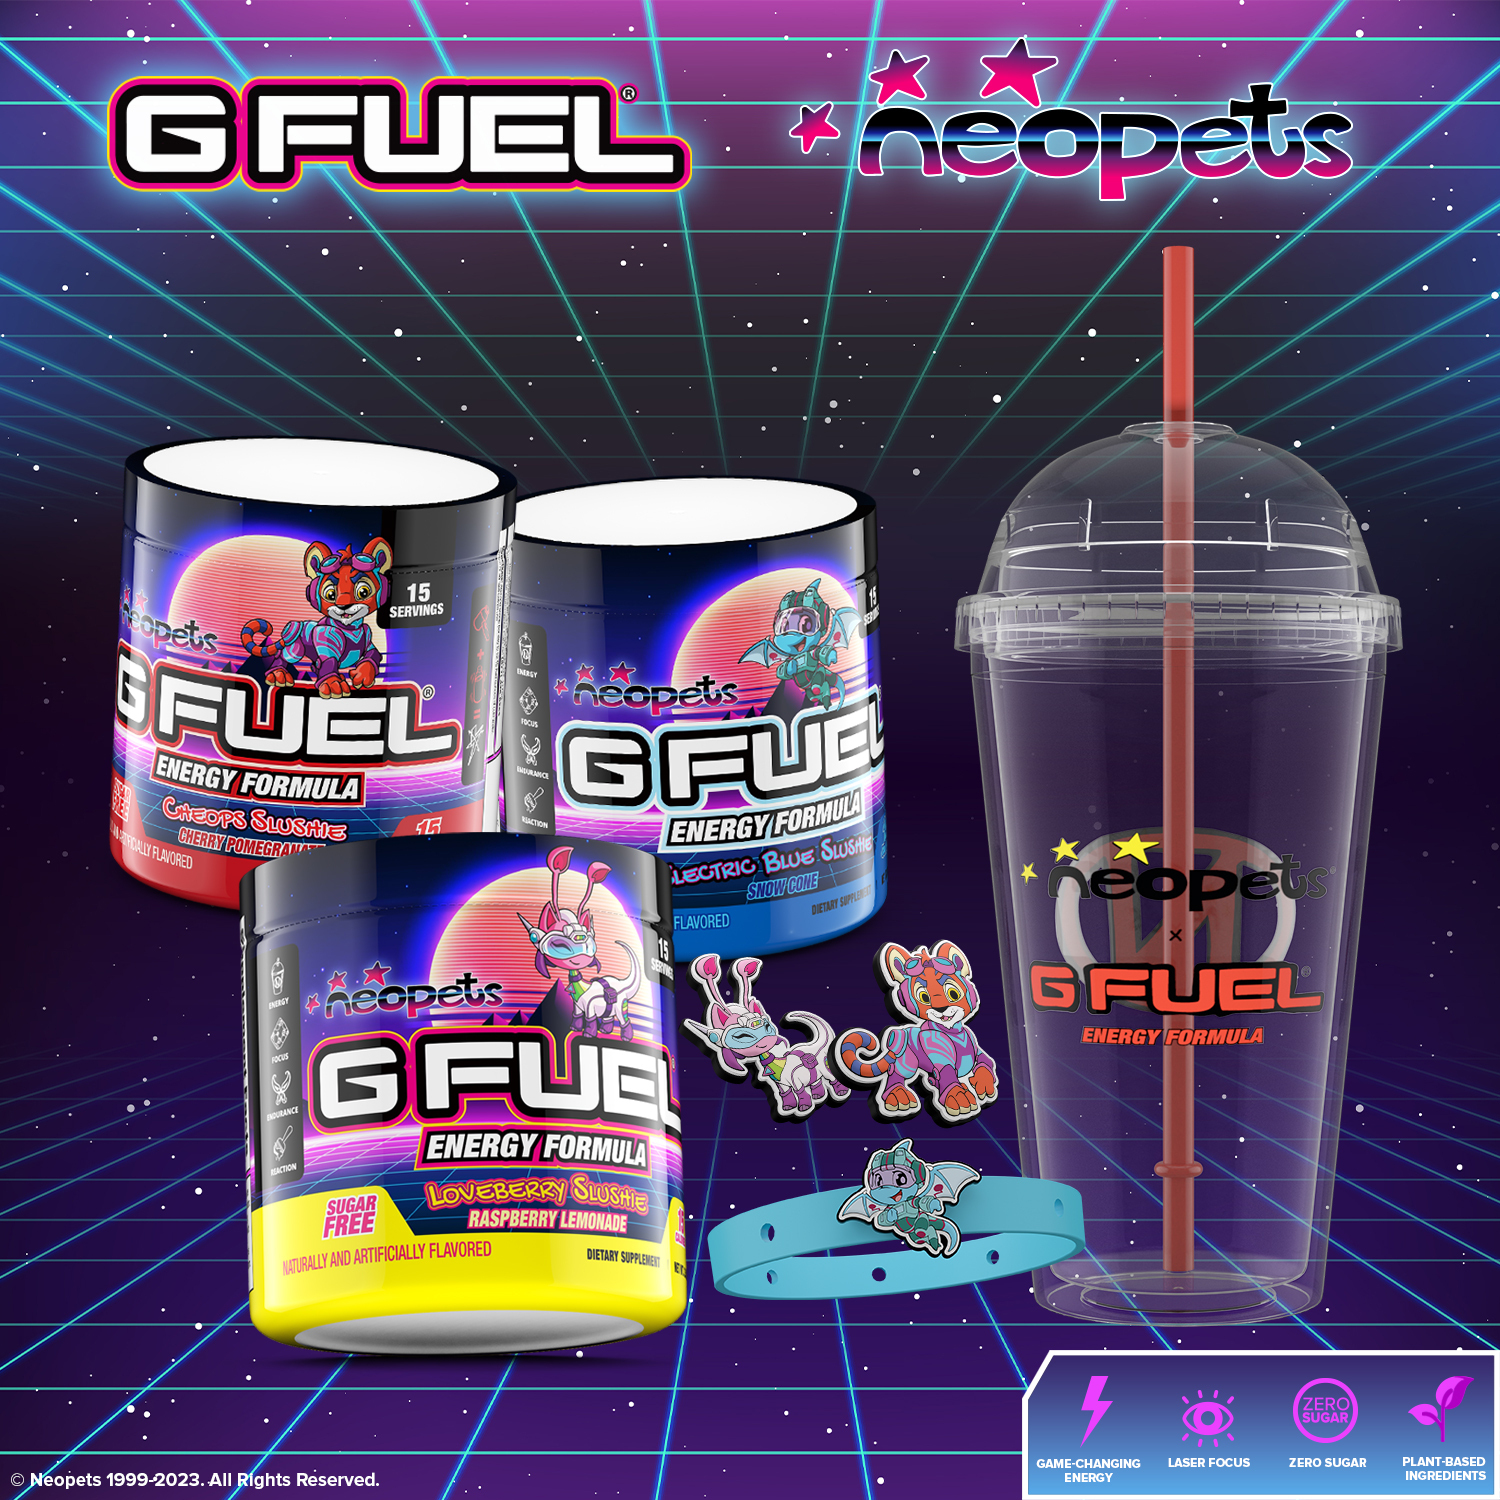 https://images.neopets.com/images/nf/gfuel_neopets.png